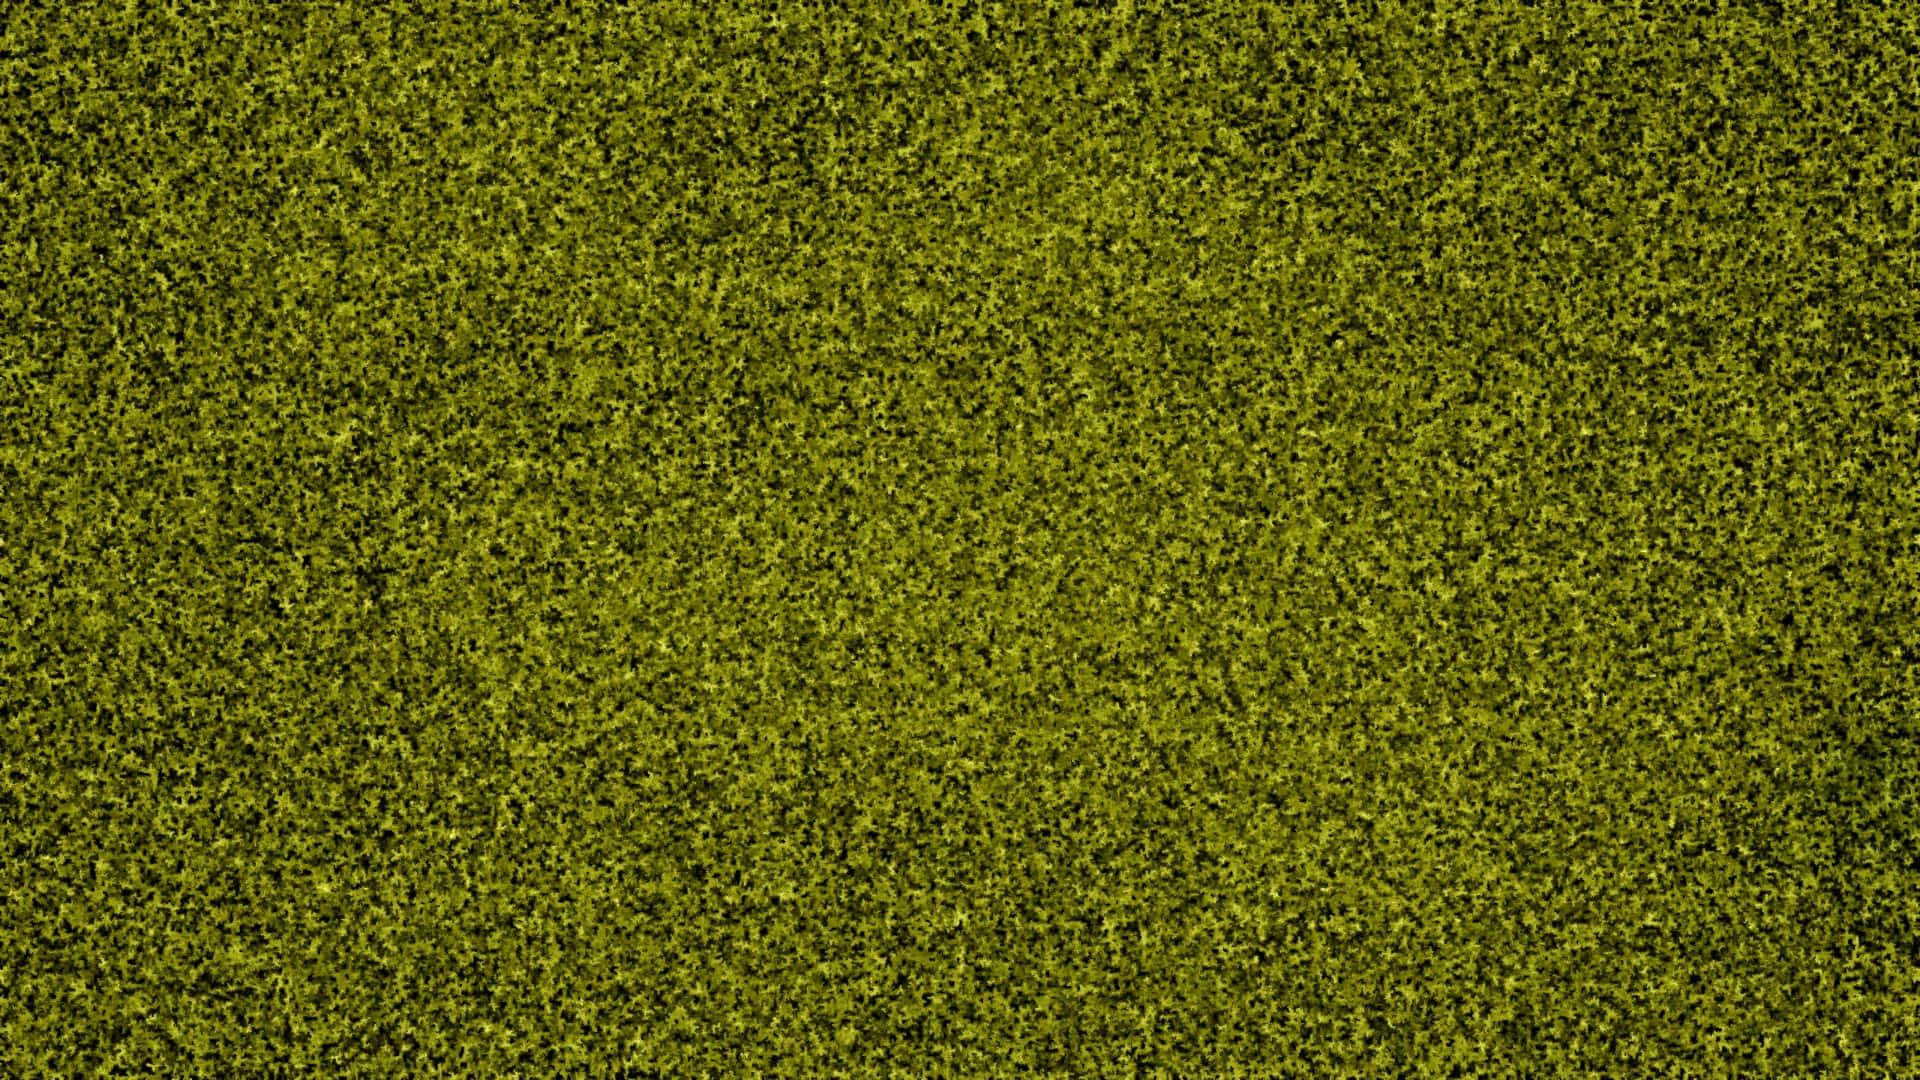 Rough Texture In Olive Green Background